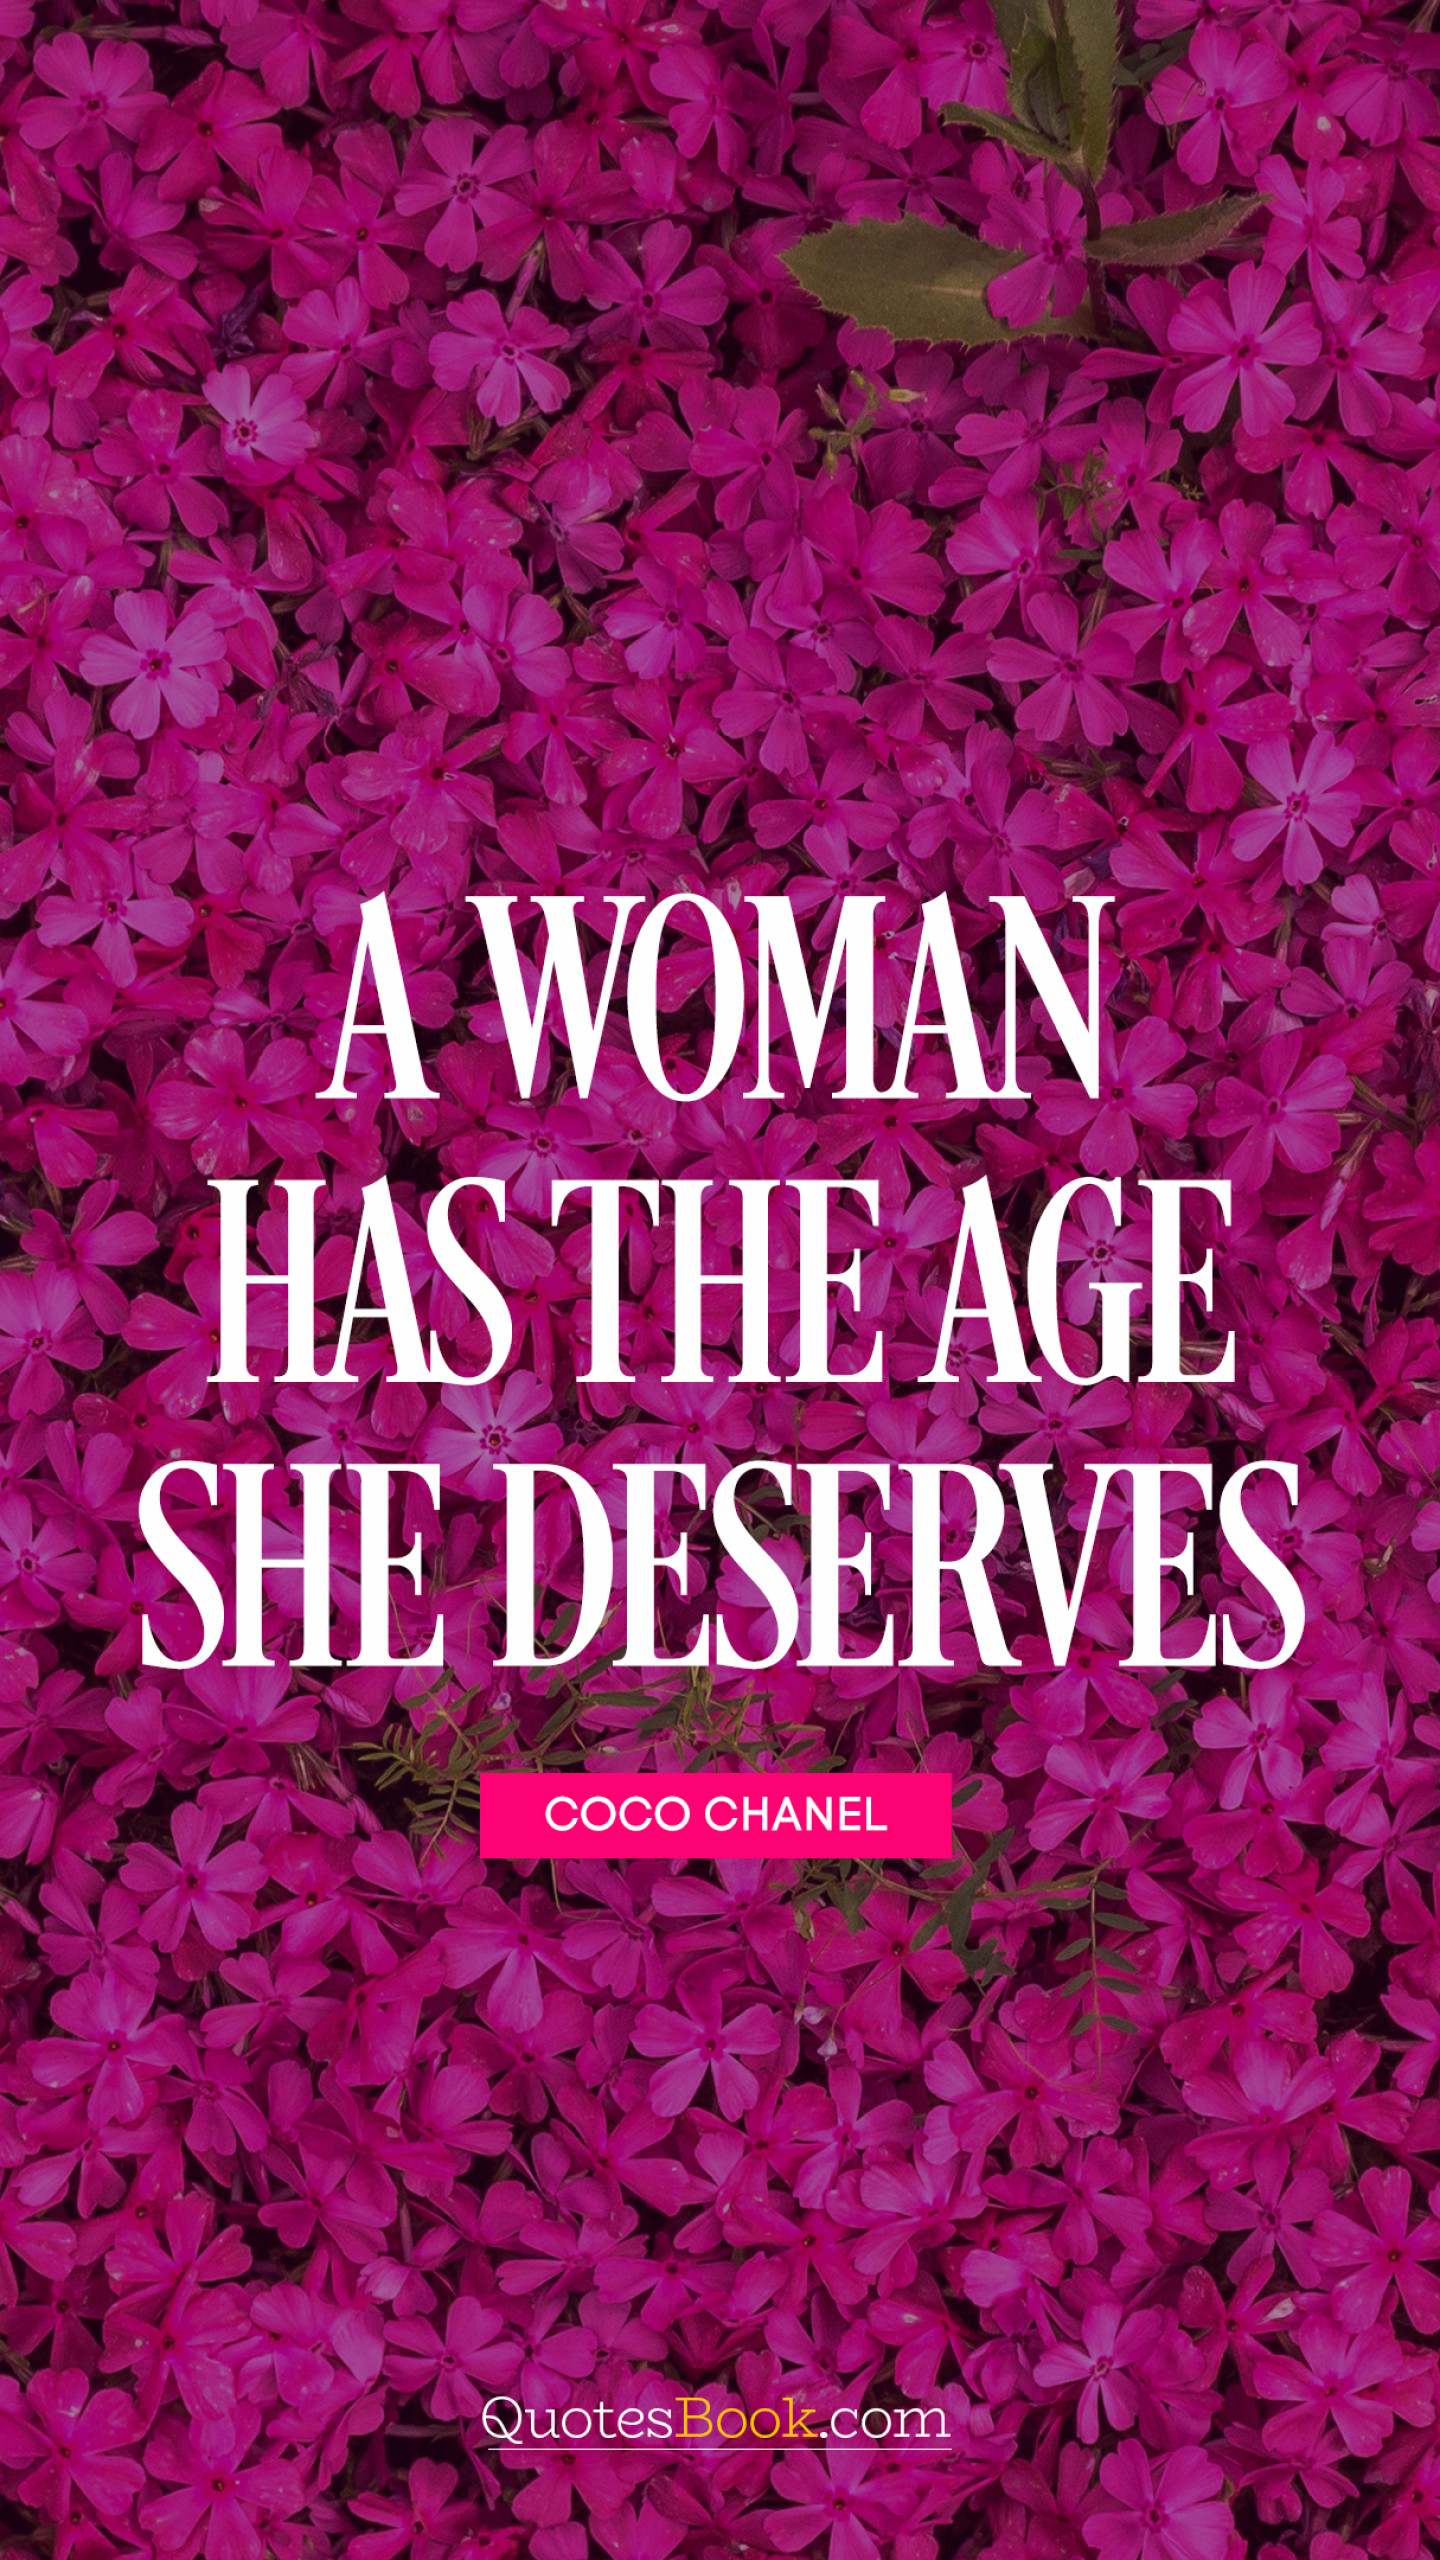 Coco Chanel Quotes About Elegance  AZ Quotes